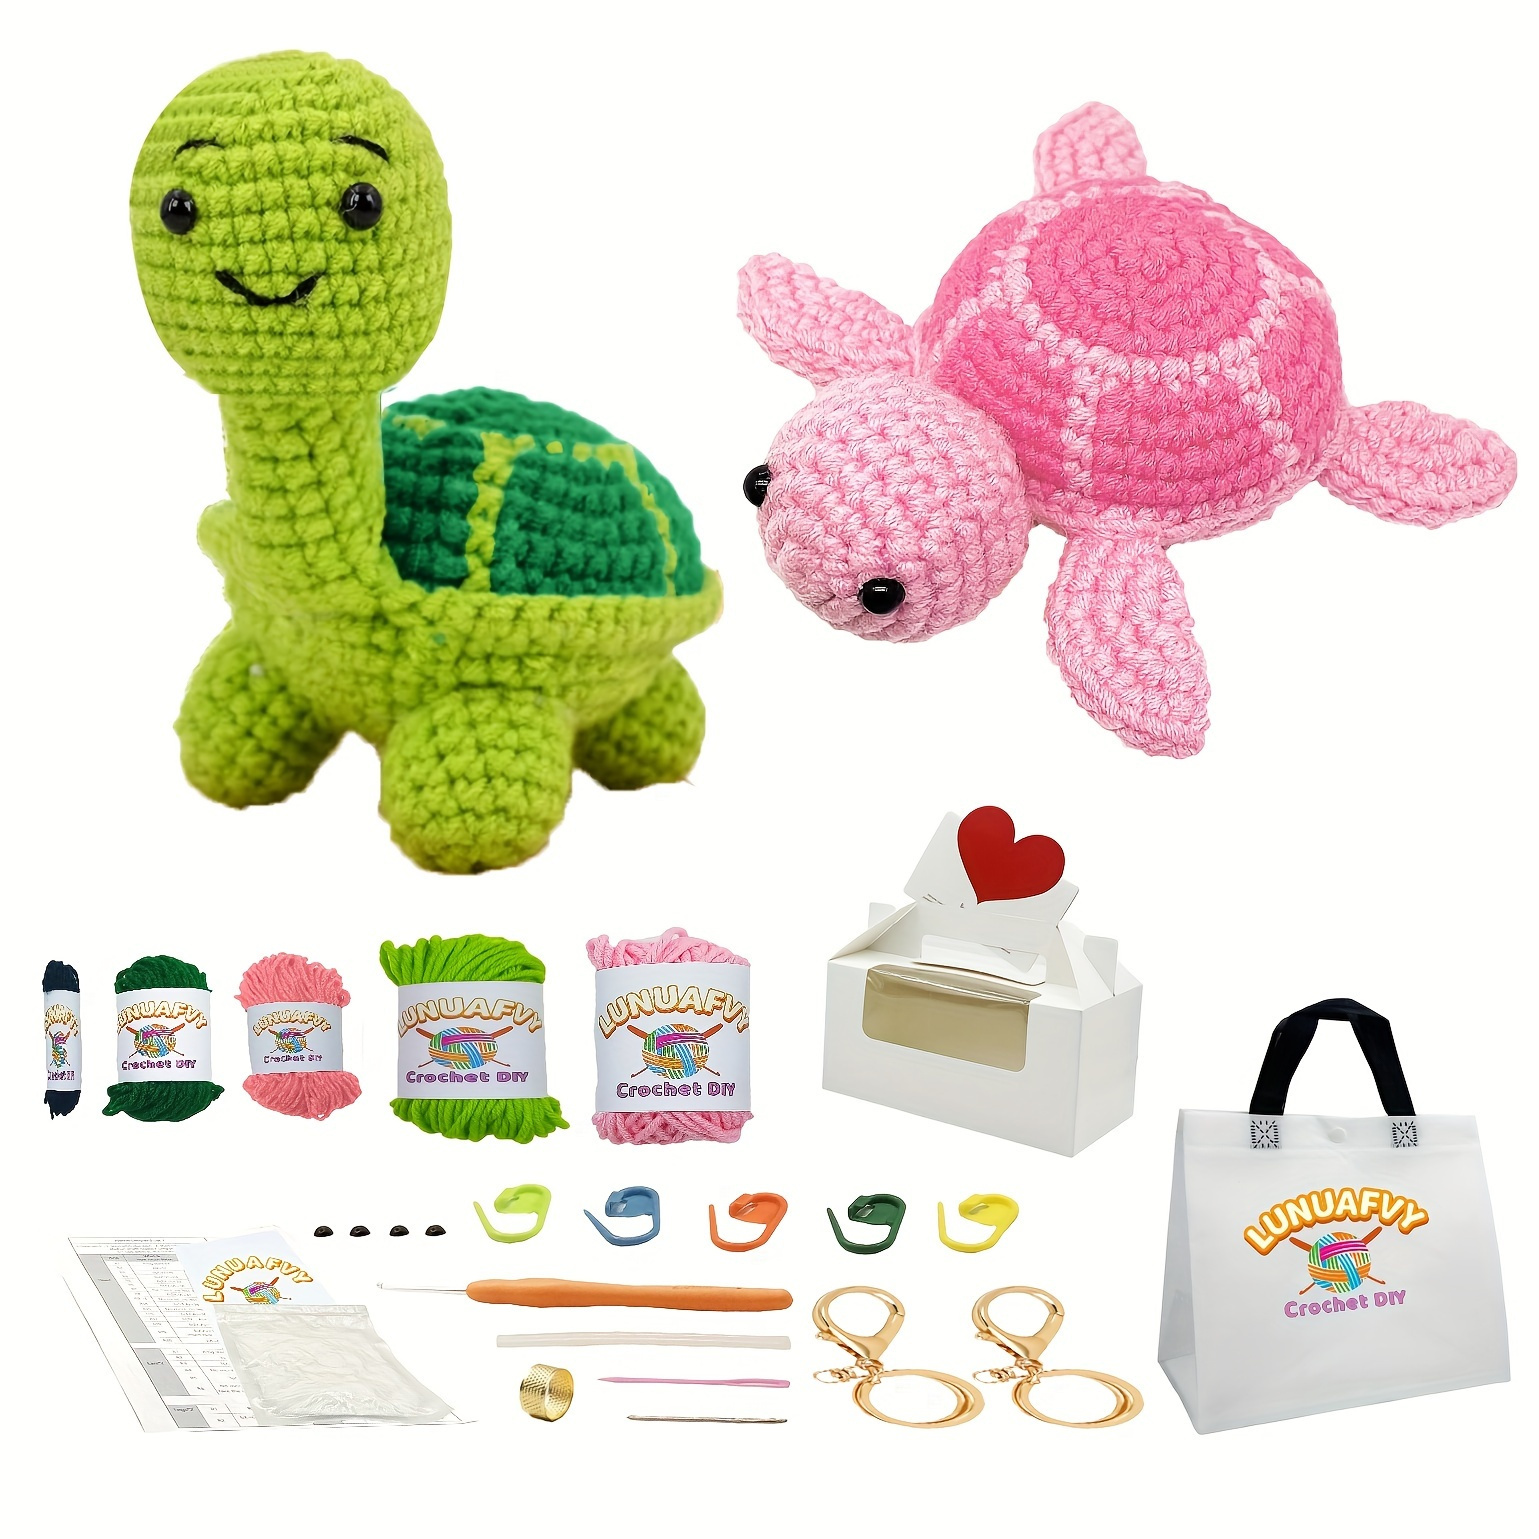 

1set New Crochet Material Package Contains English Instruction Manual, Beginner Crochet Yarn Kit For Adults, Knitting Handmade Diy Cartoon Doll For Beginners